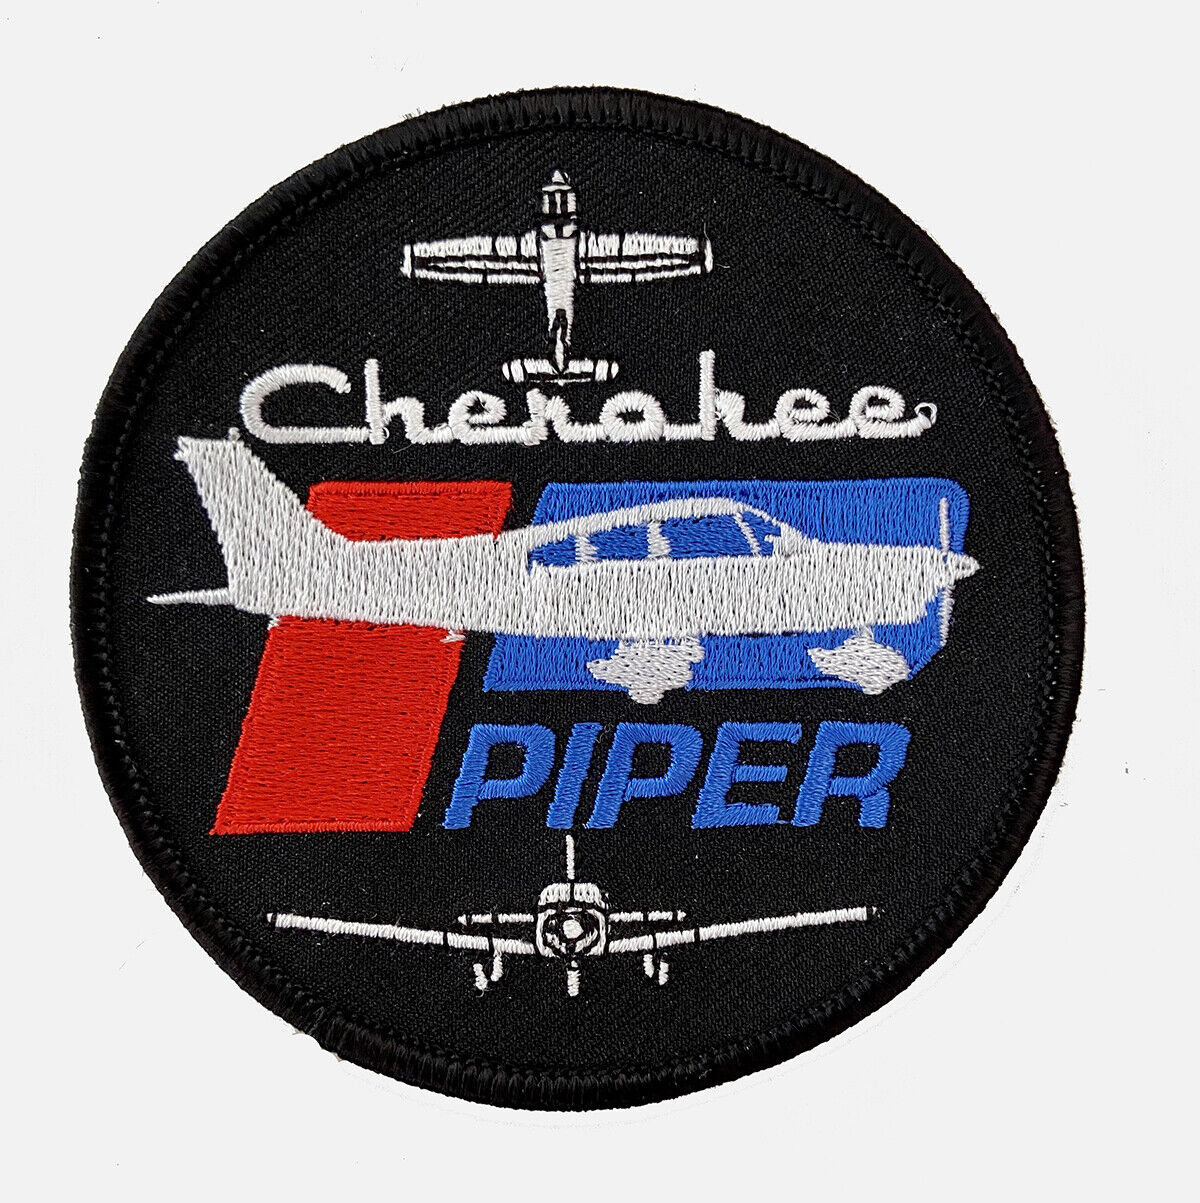 PATCH Piper Cherokee Bomber Pilot Jacket sew-on or iron-on large size fabric